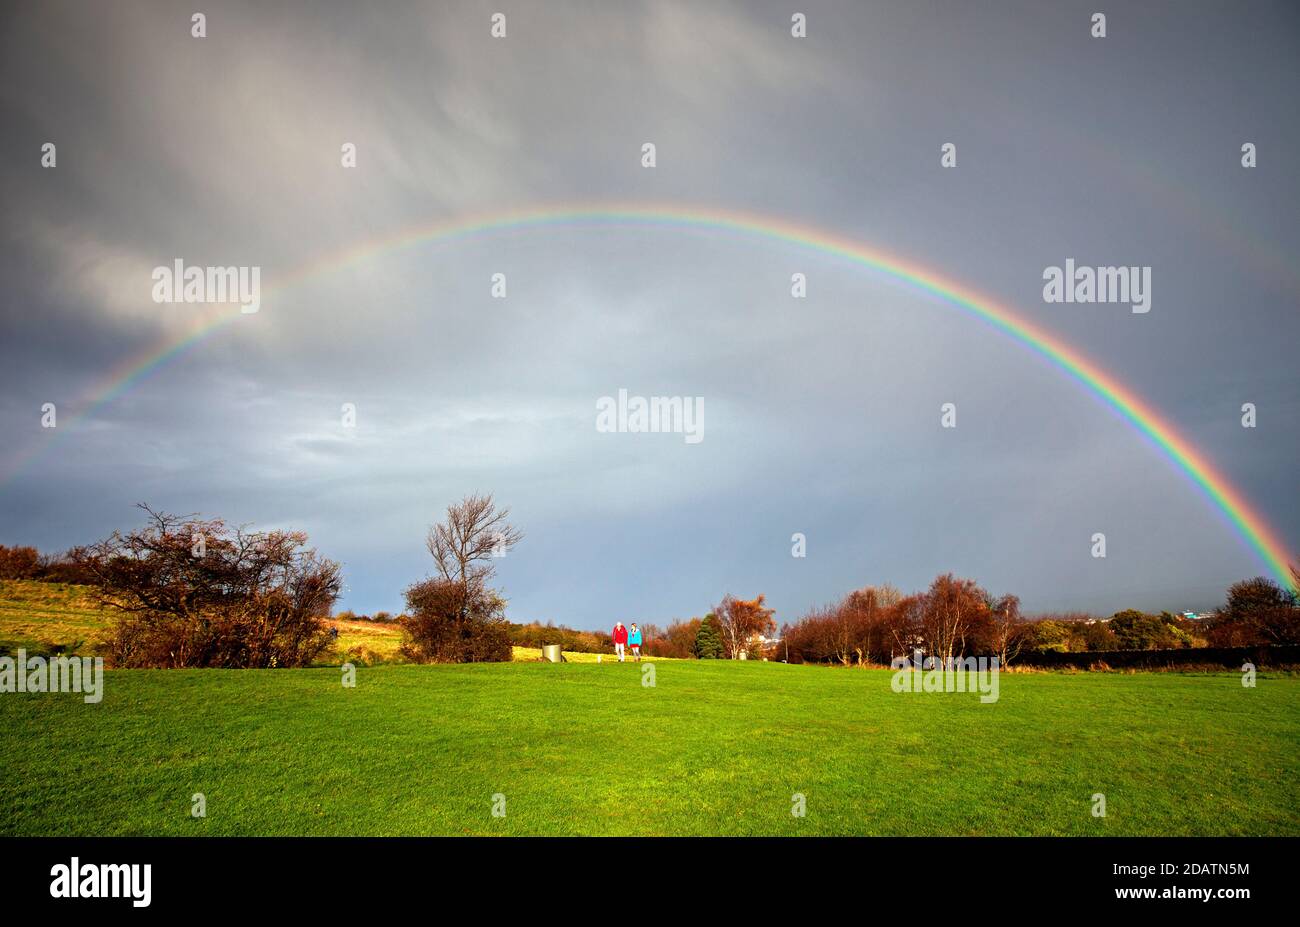 Holyrood Park, Edinburgh, Scotland, UK. 15 November 2020. Beautiful rainbow with the hint of a double above the Scottish capital after a heavy rain shower just before noon, temperature 10 degrees. Credit: Arch White/Alamy Live News. Stock Photo